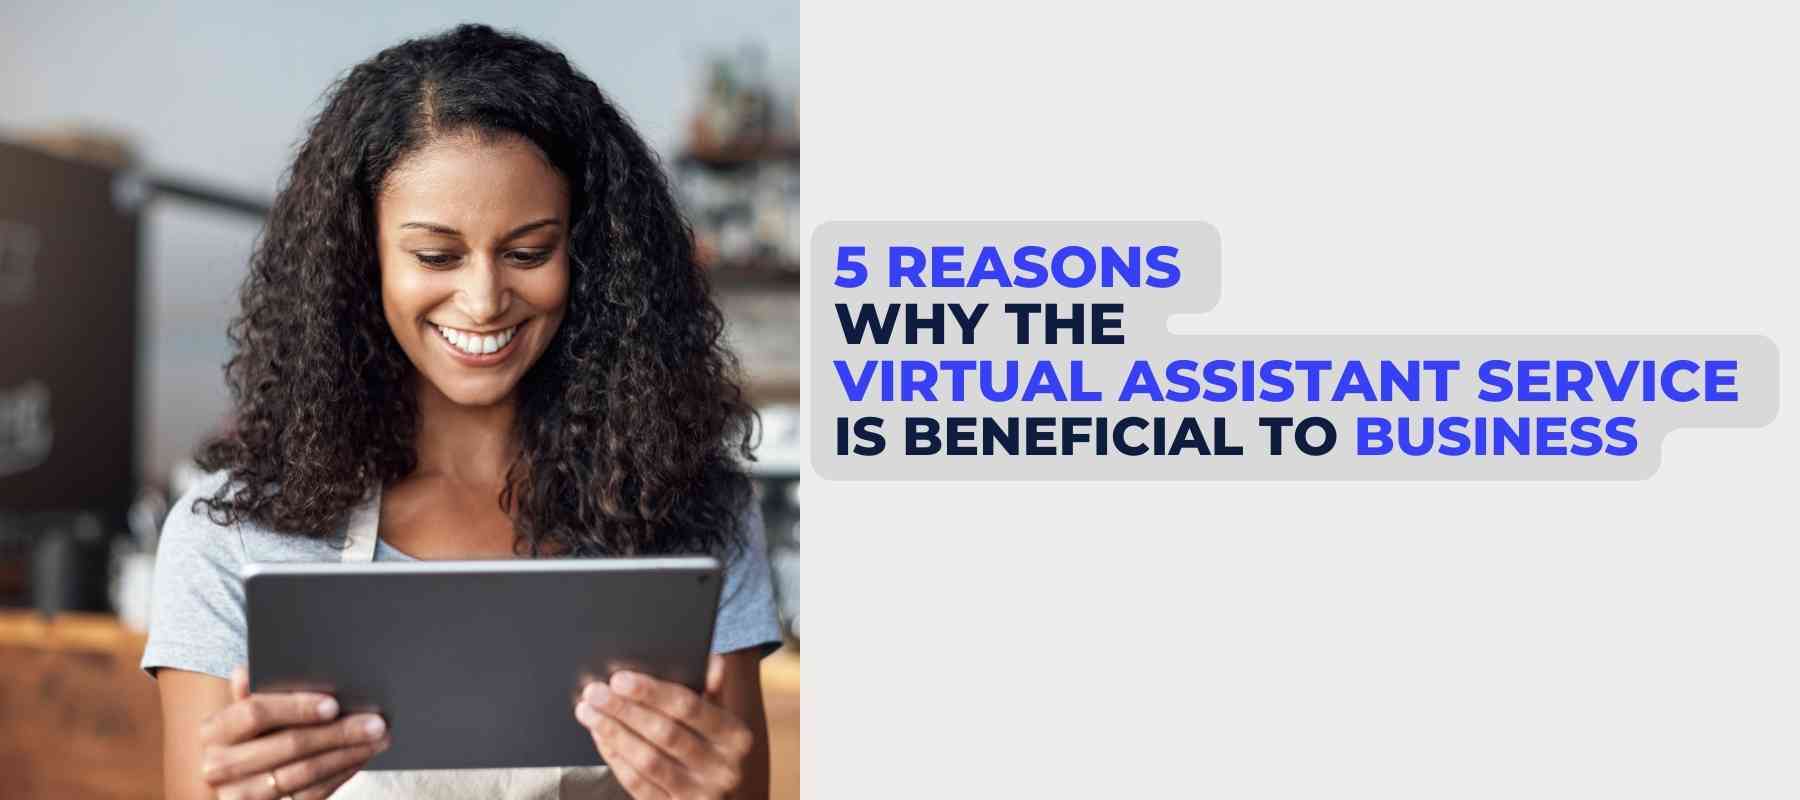 why Virtual Assistant Service is beneficial to Business - top 5 reasons